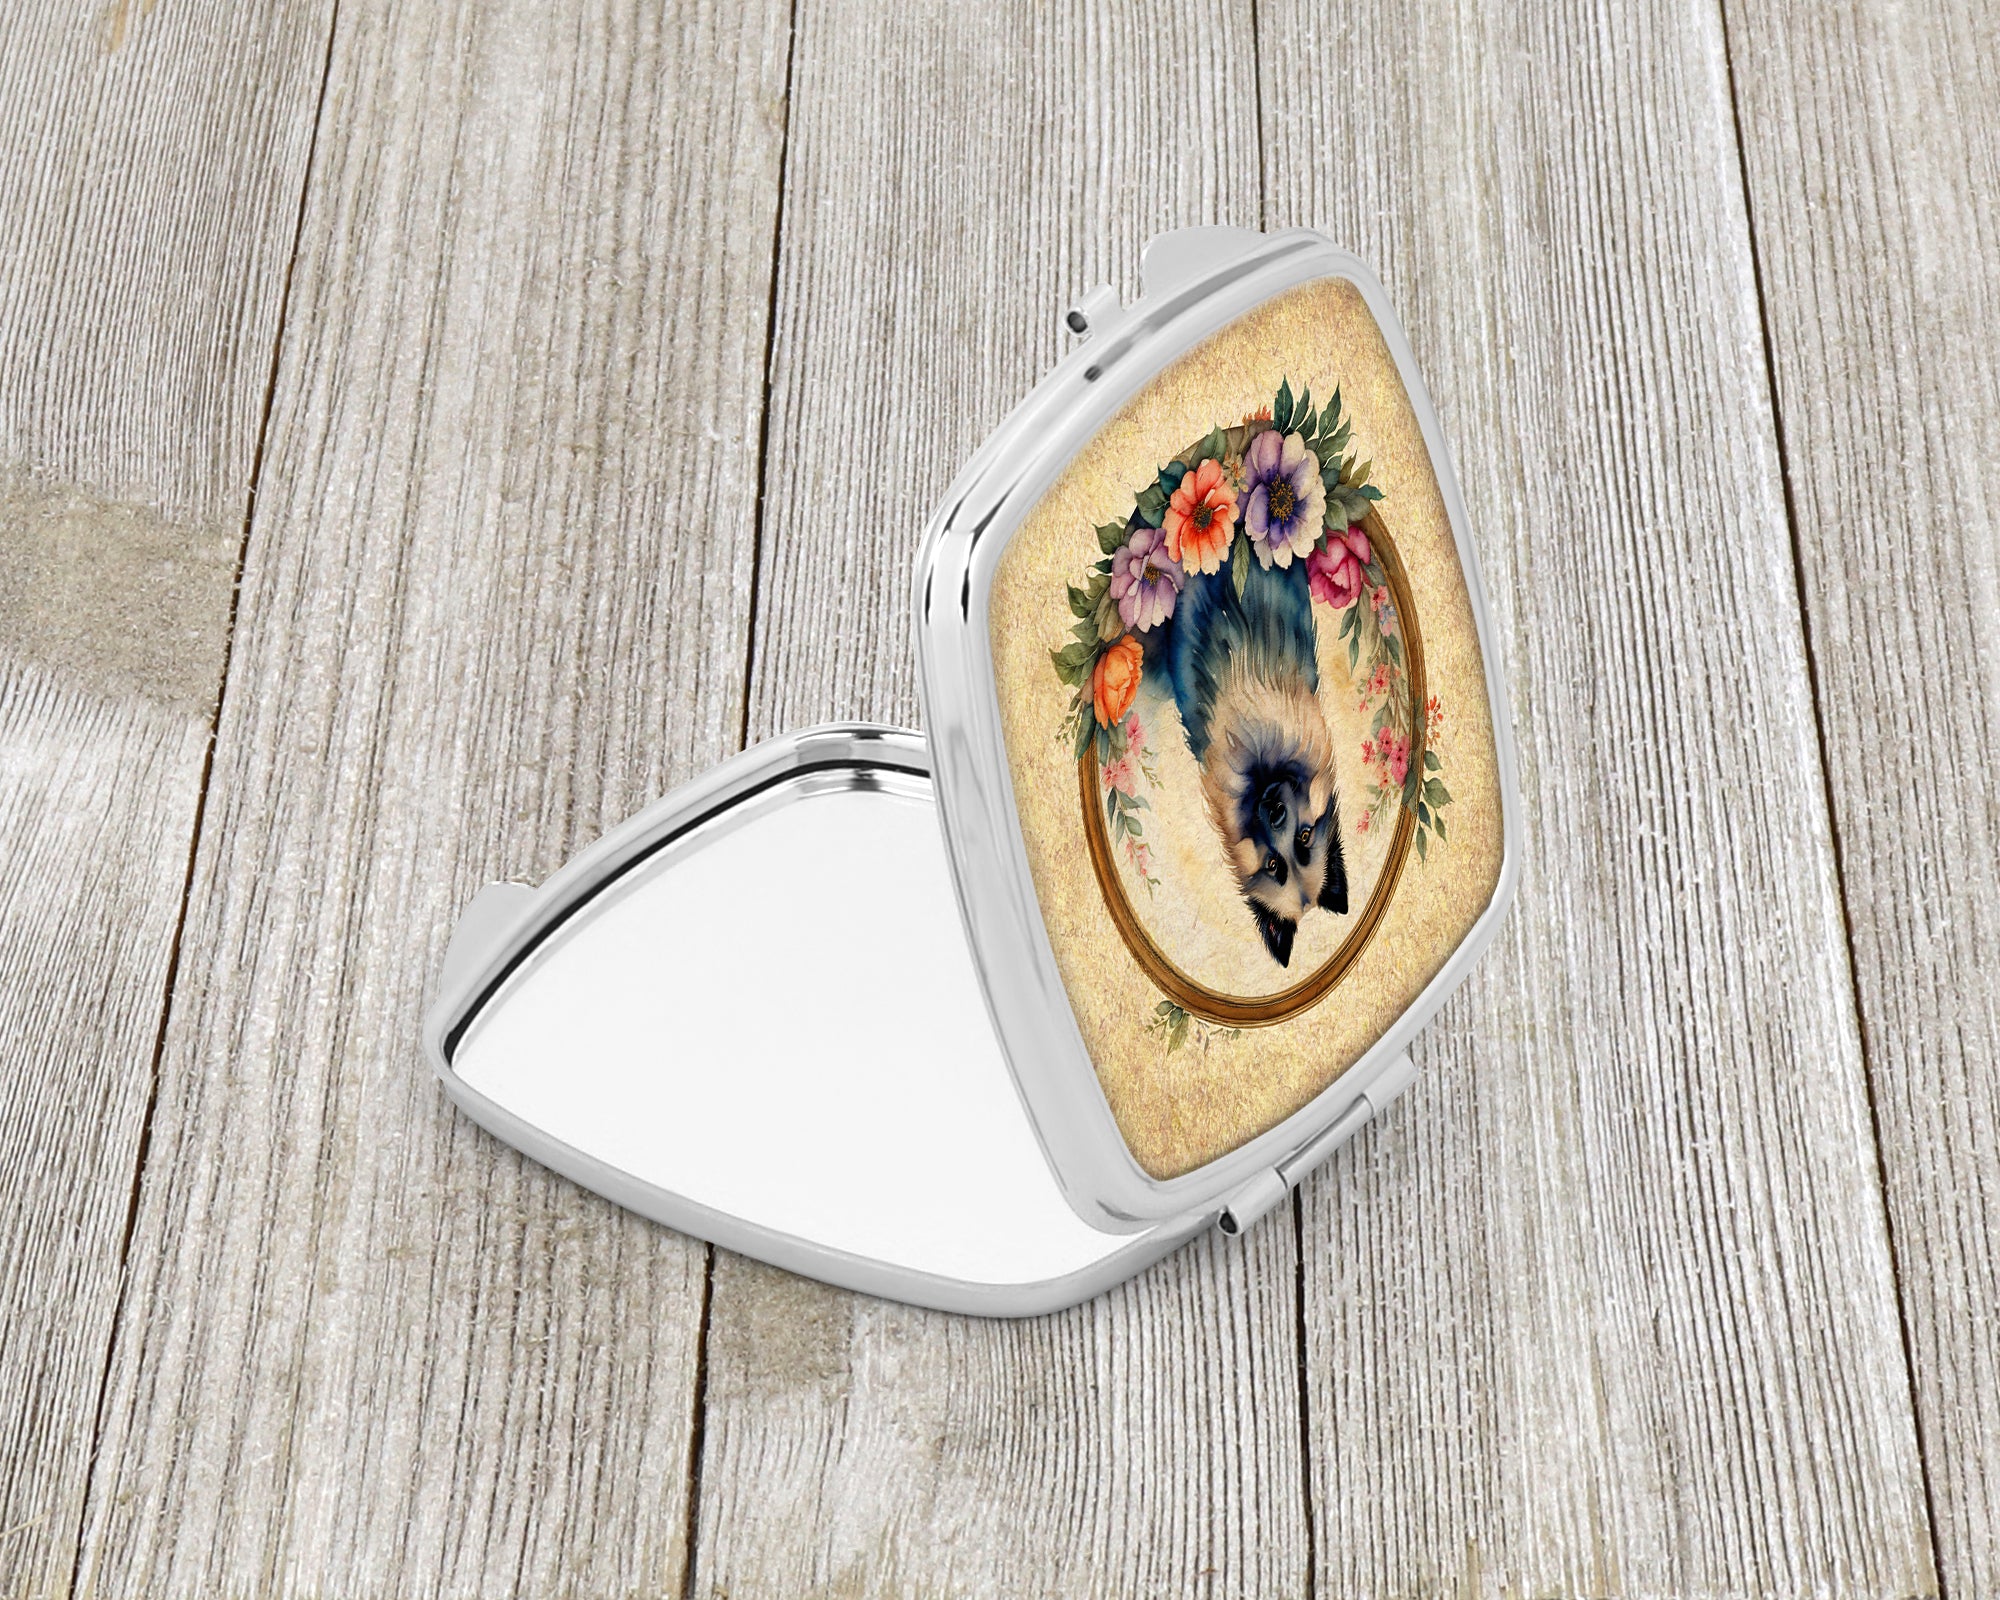 Keeshond and Flowers Compact Mirror